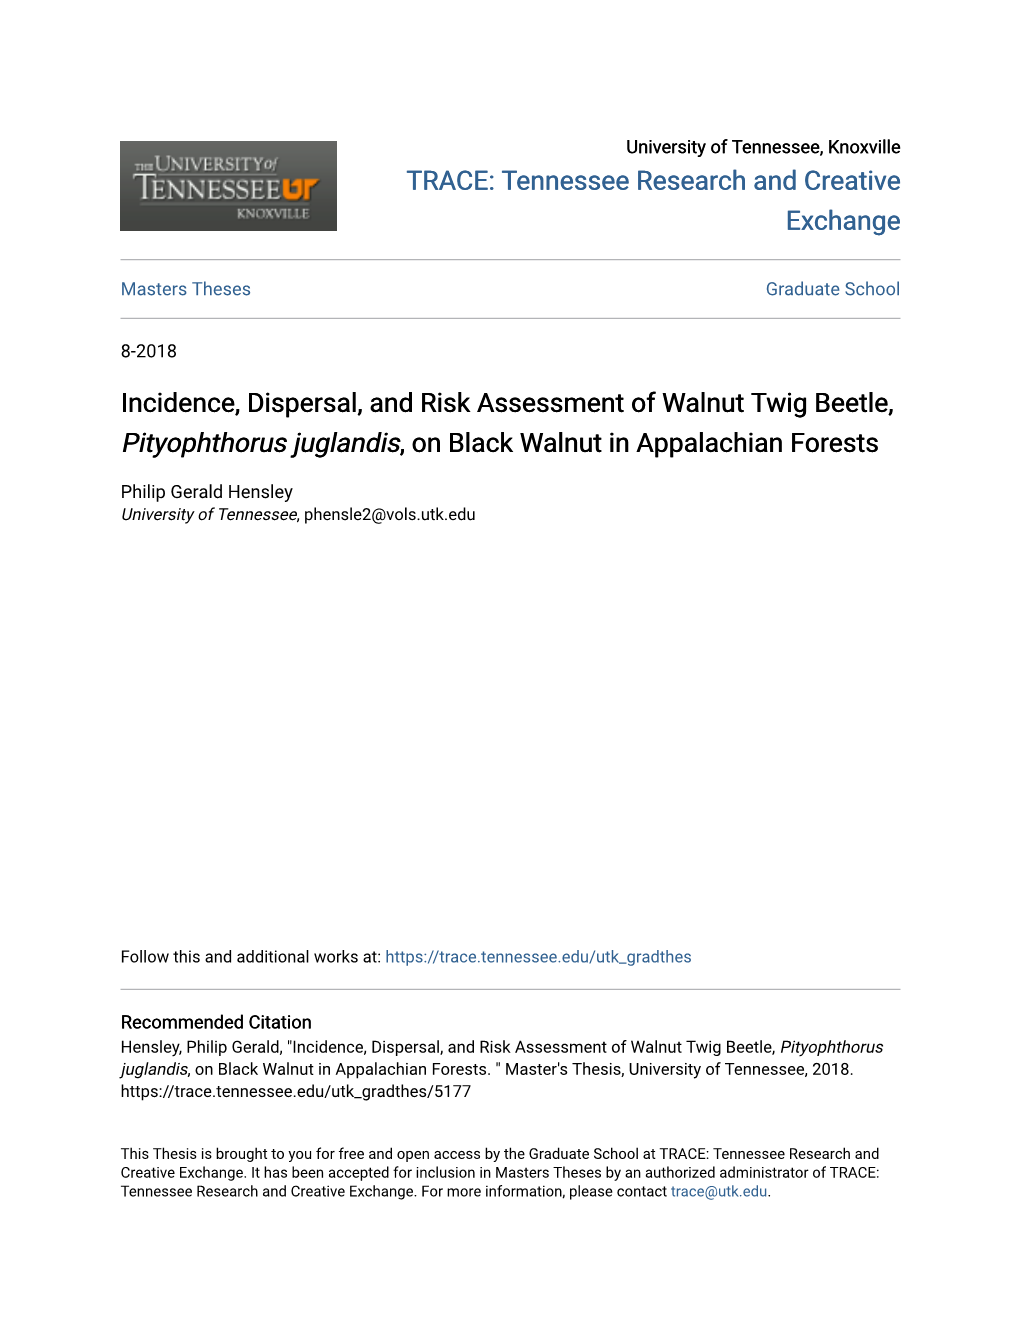 Incidence, Dispersal, and Risk Assessment of Walnut Twig Beetle, Pityophthorus Juglandis, on Black Walnut in Appalachian Forests